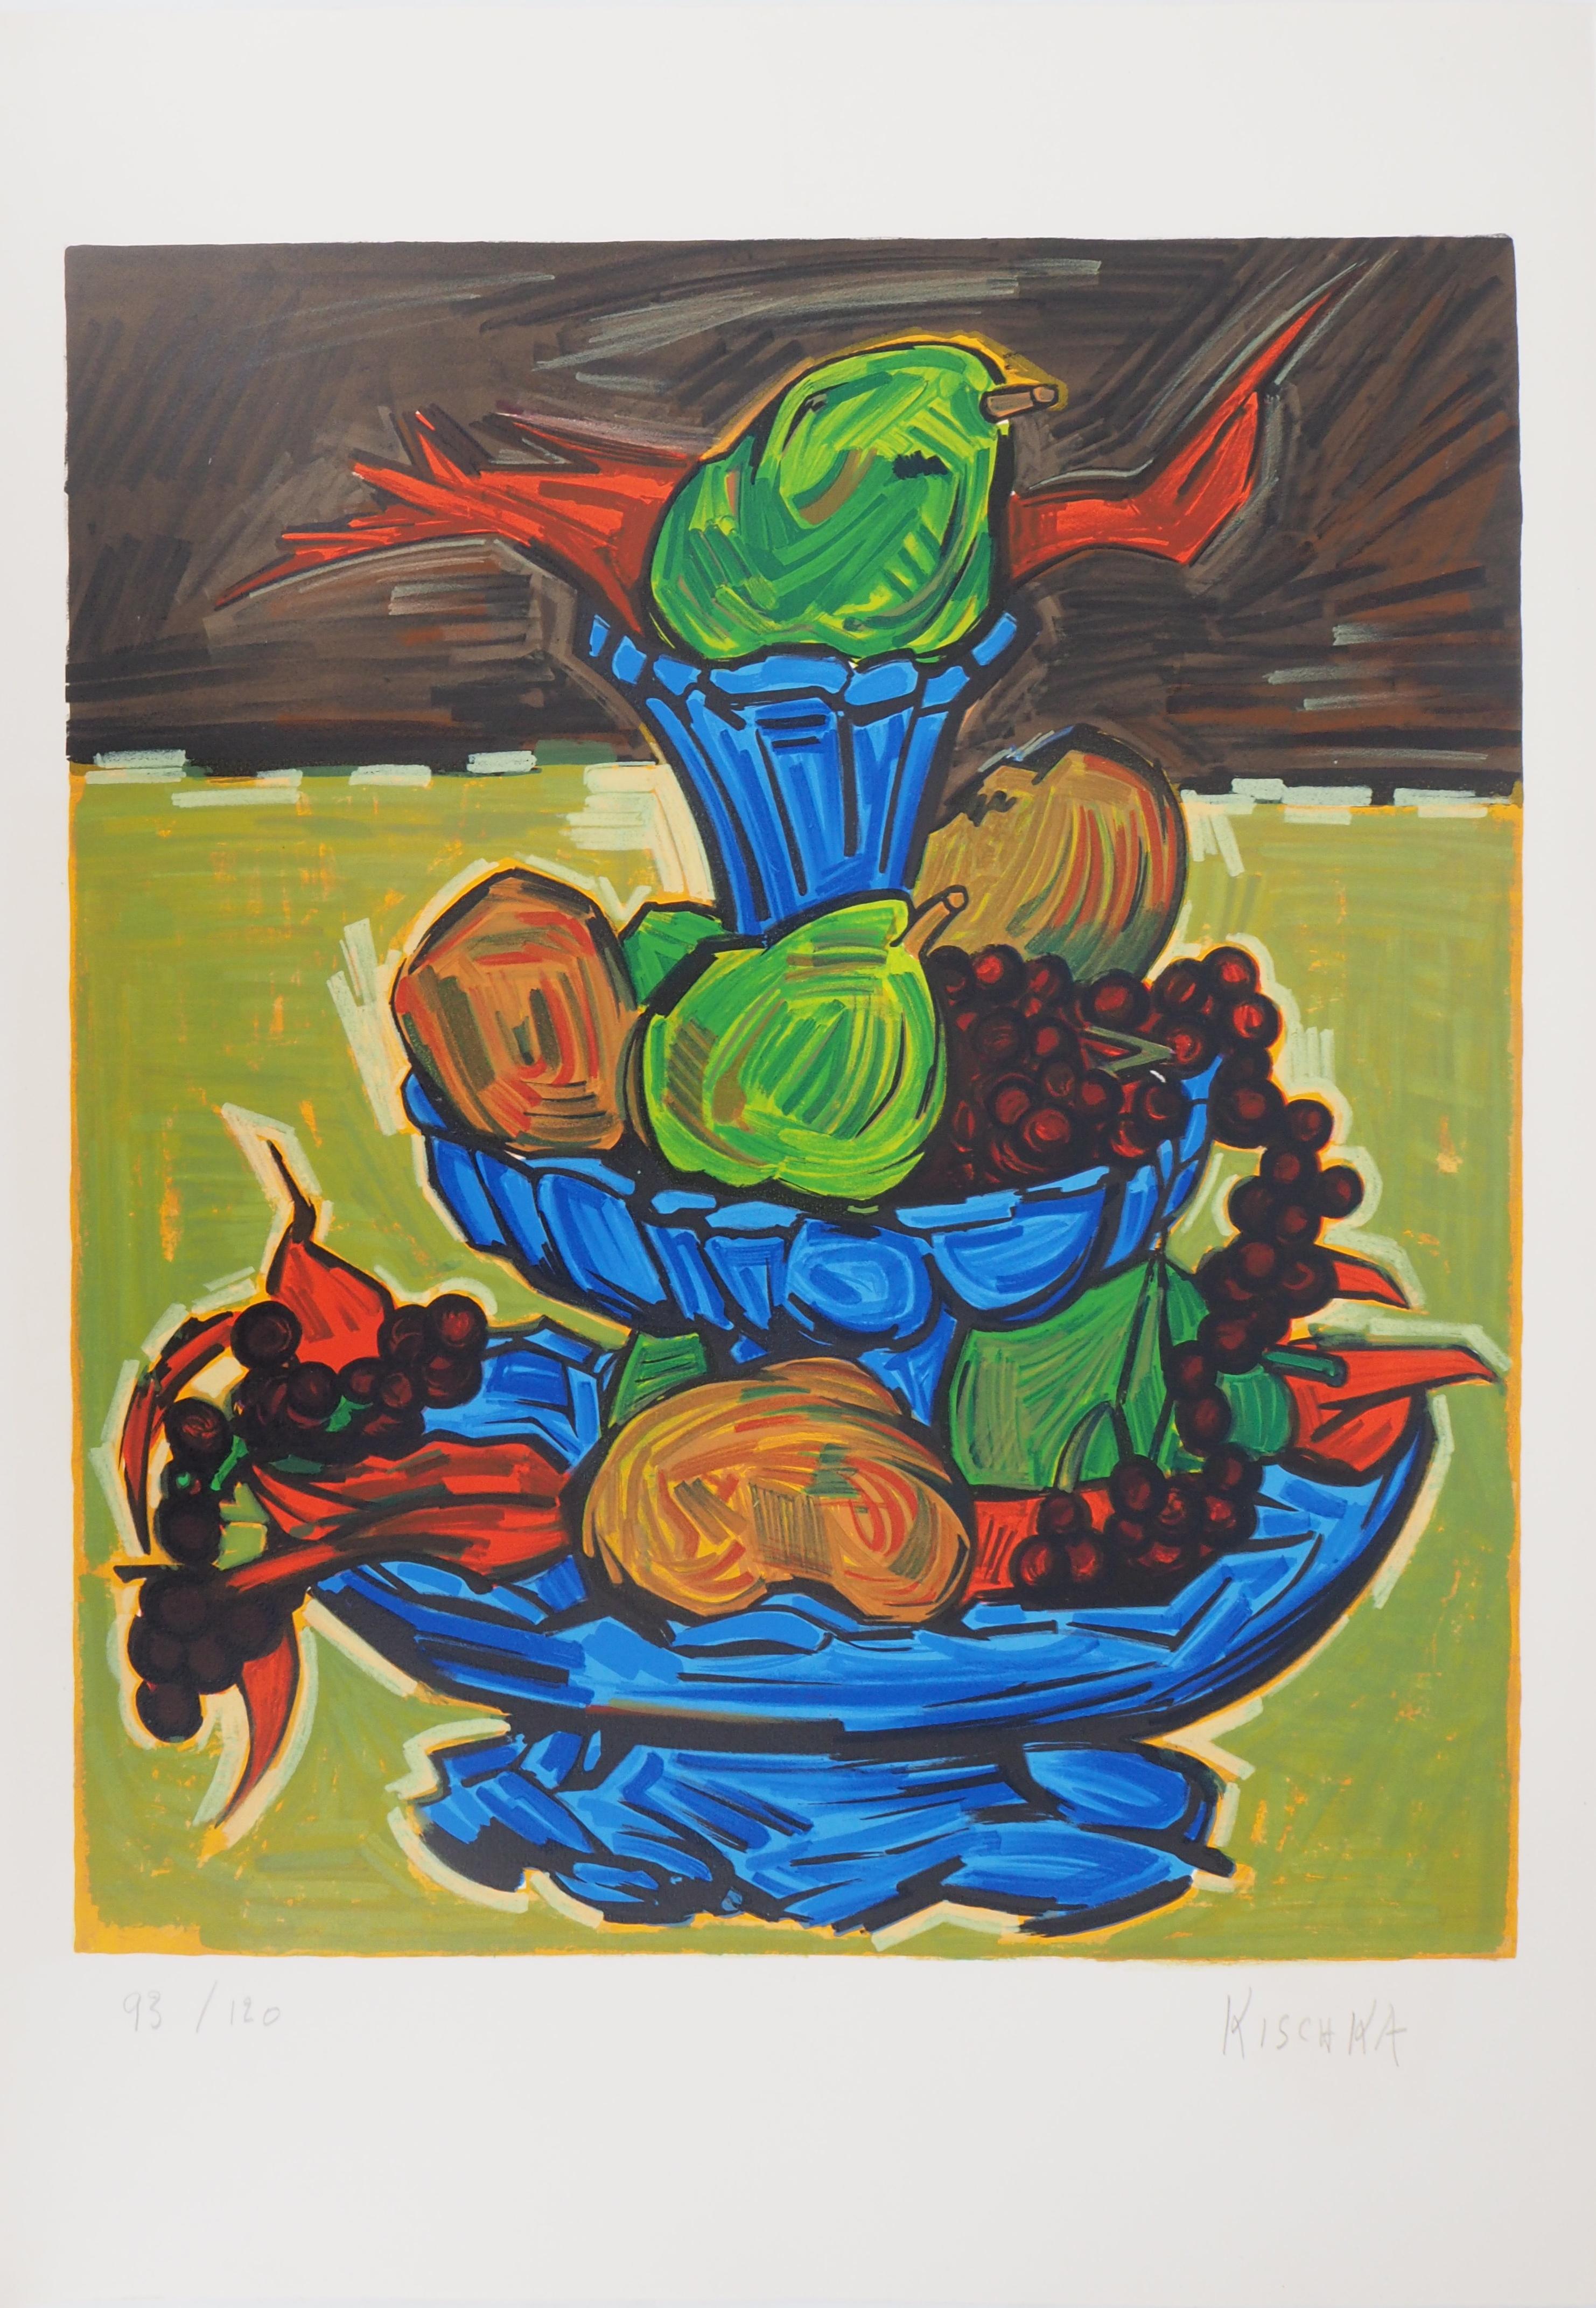 Isis Kischka Still-Life Print - Still Life with Fruits - Original Lithograph Handsigned and Numbered (Mourlot)